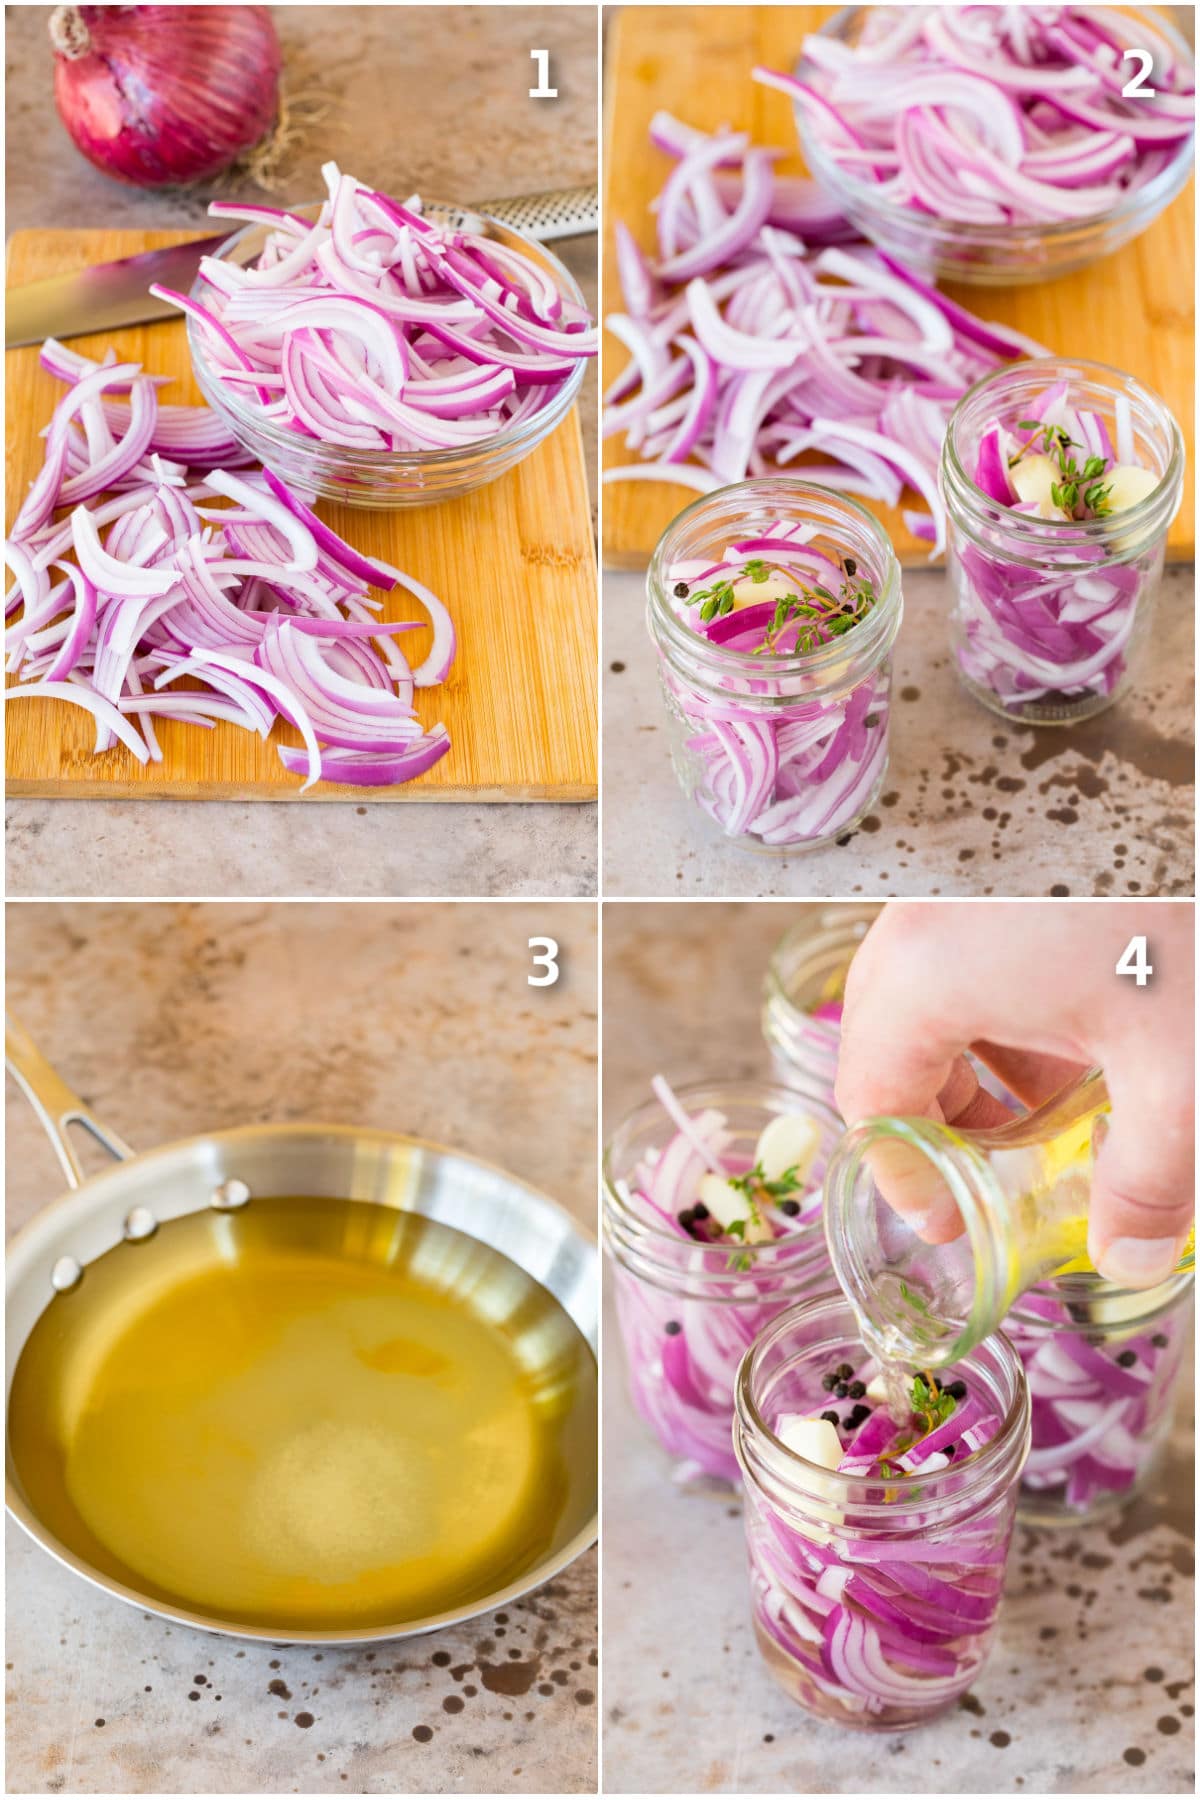 Step by step process shots showing how to pickle red onions.